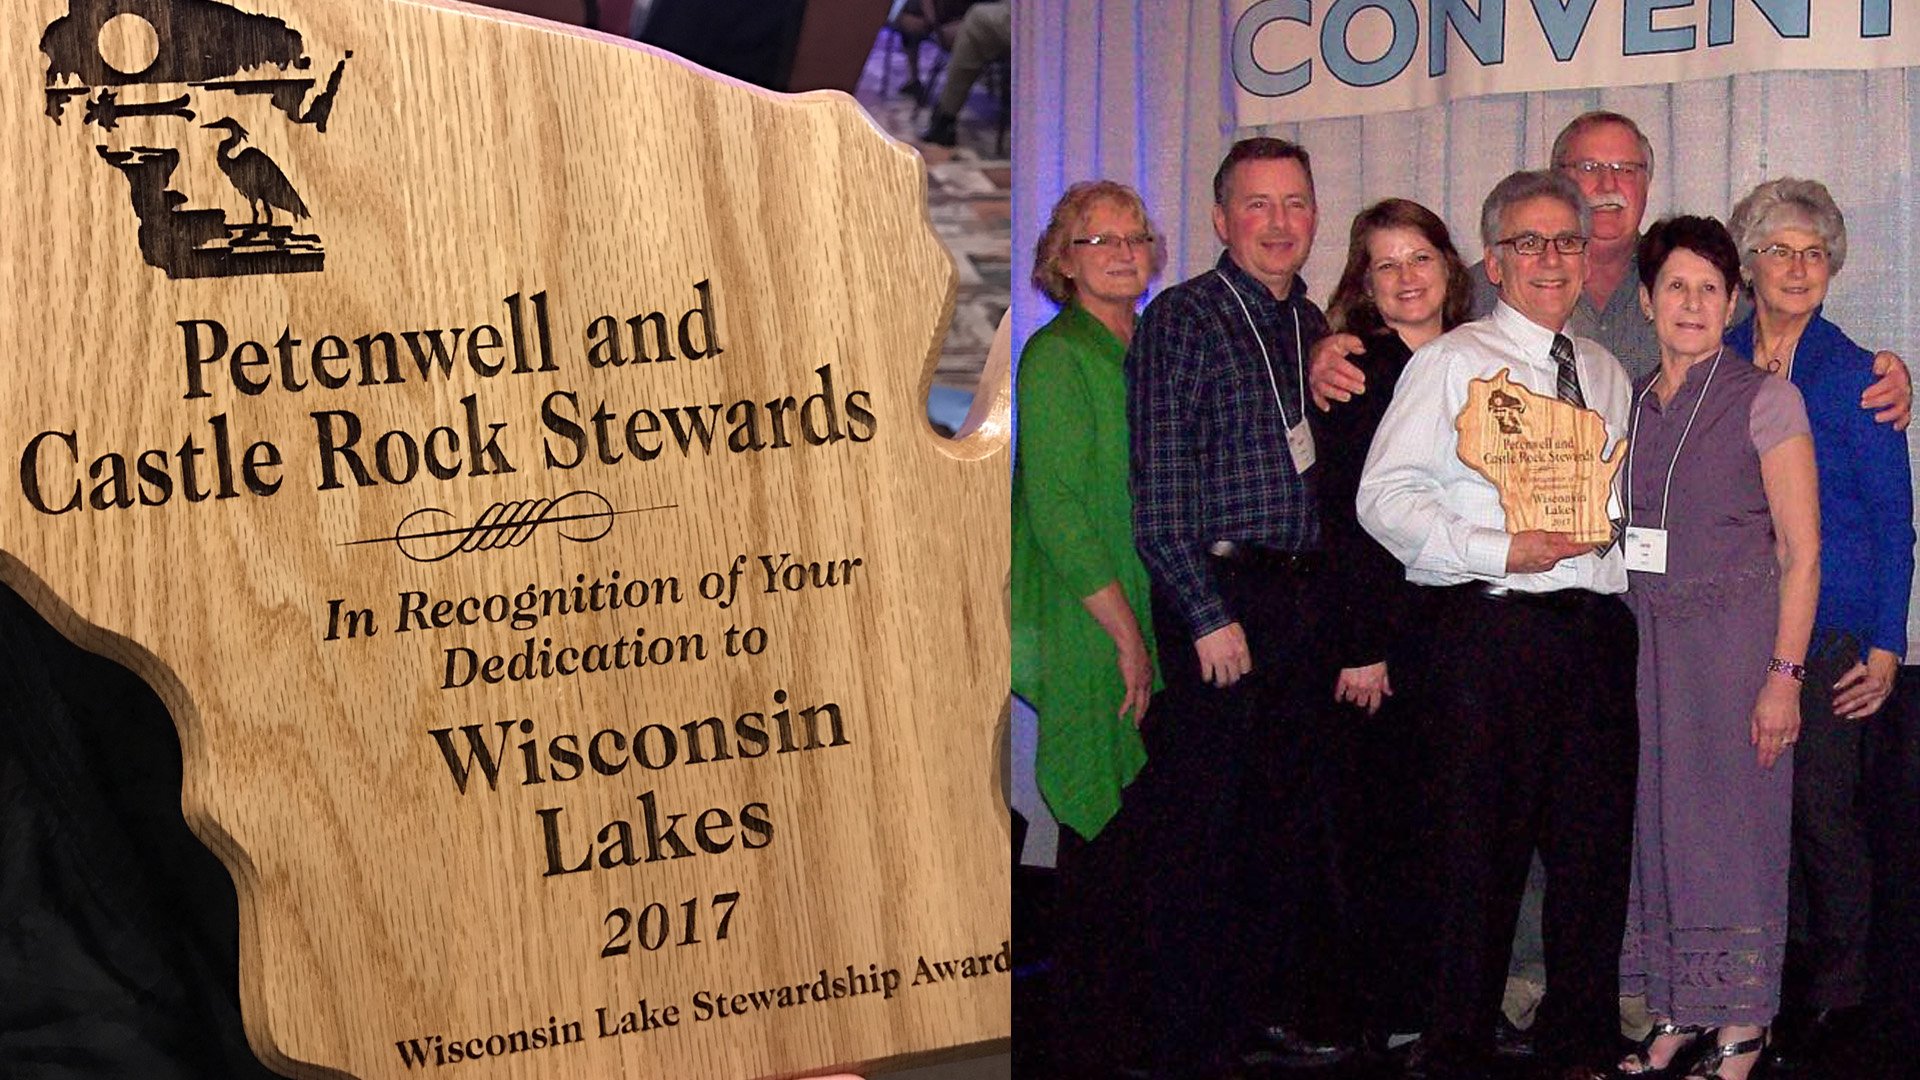 PACRS receives the Wisconsin Lake Stewardship Award in 2017